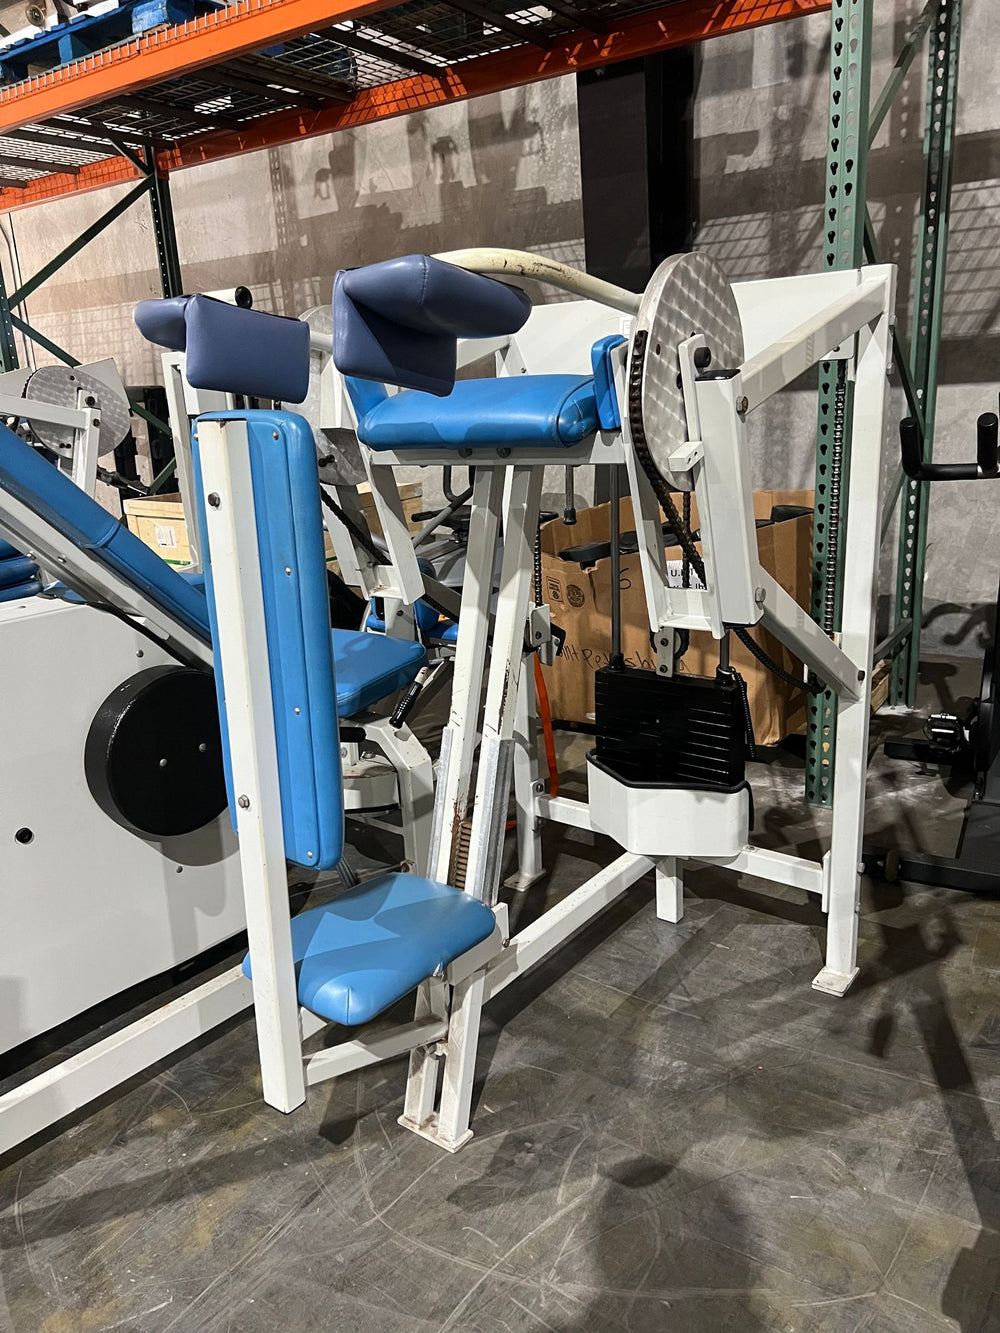 Nautilus Generation 1 Tricep Extension - Buy & Sell Fitness